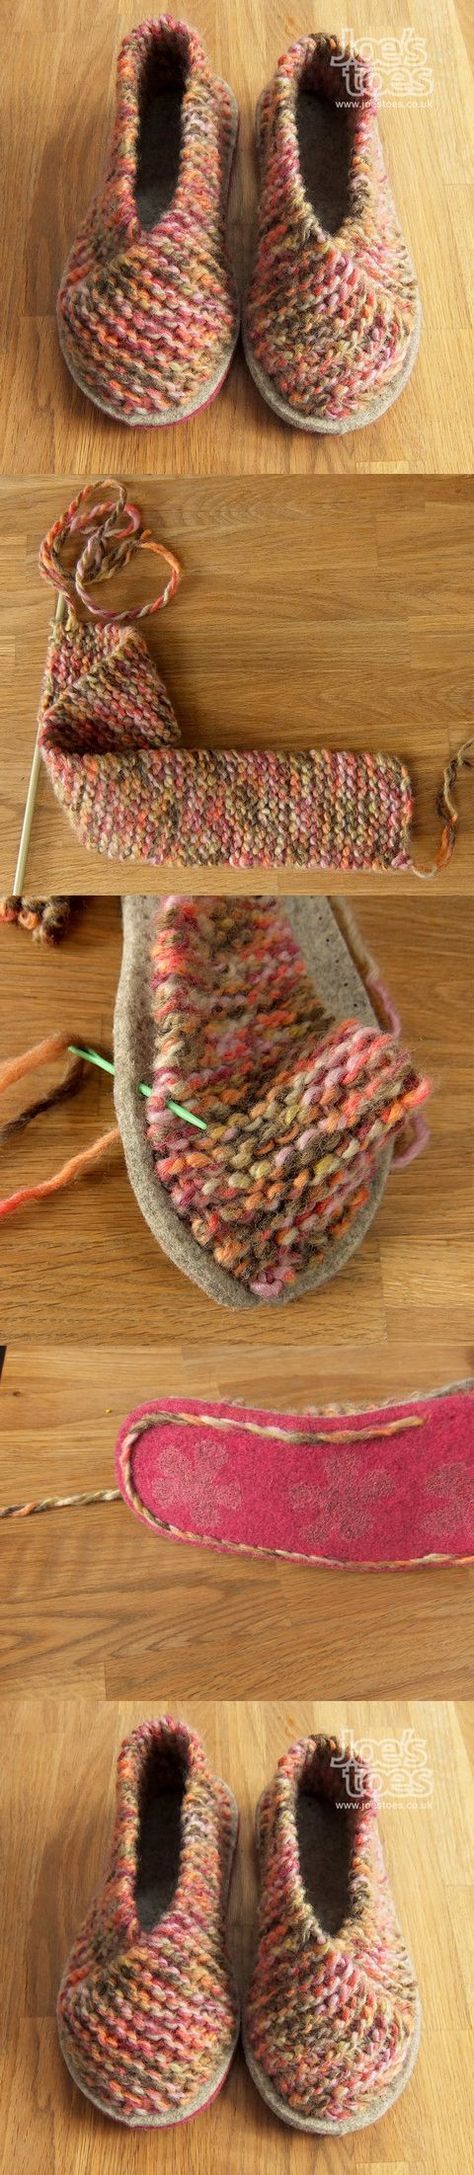 knit slippers knitted slippers pattern the sweetest ideas XKVZUIQ